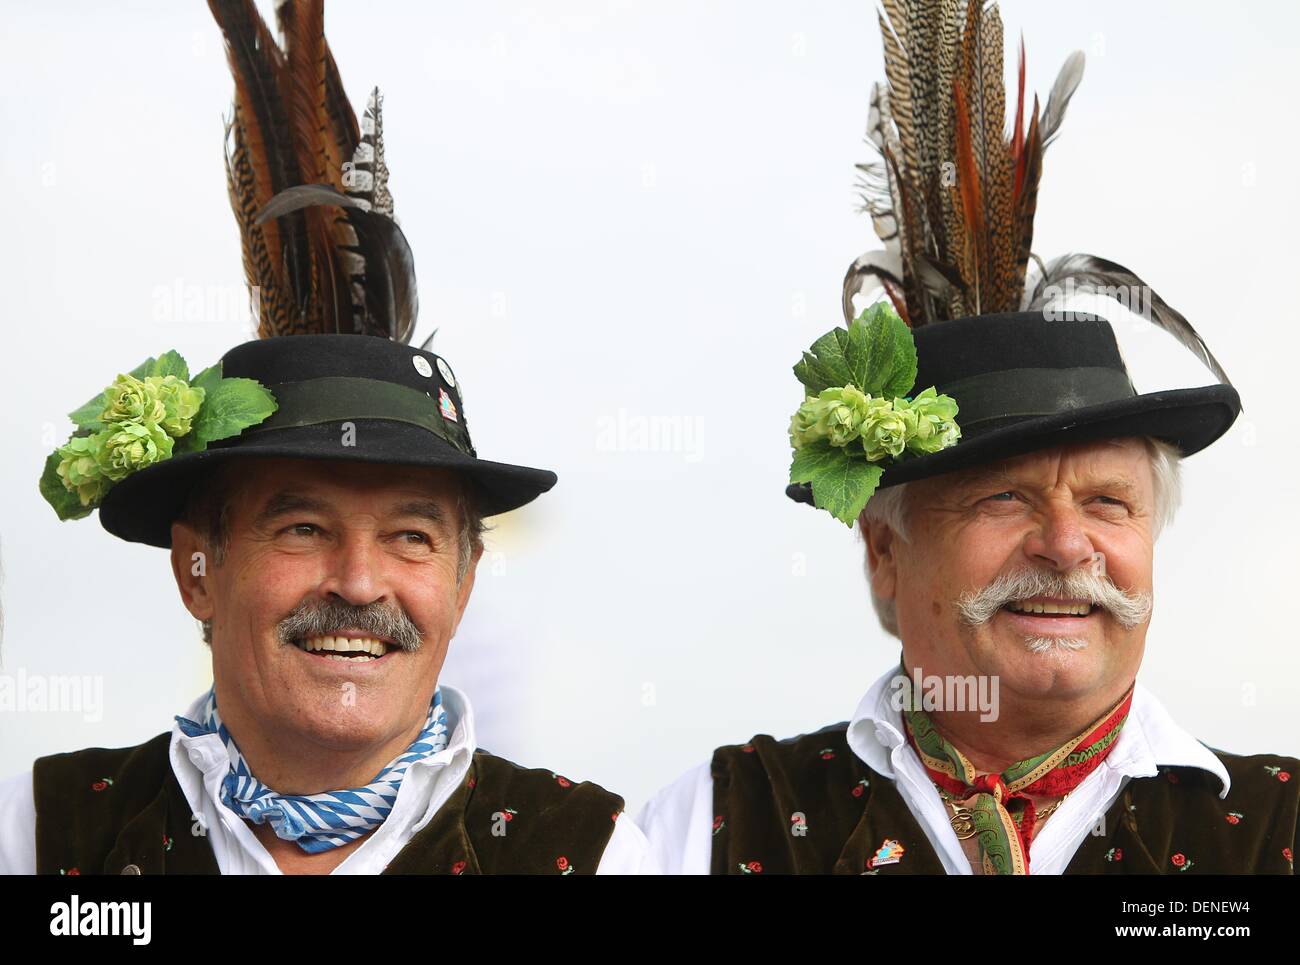 Munich, Germany. 21st Sep, 2013. Two men wear traditional German hats at  the Oktoberfest in Munich, Germany, 21 September 2013. The Oktoberfest is  held from 21 September until 06 October 2013. Photo: